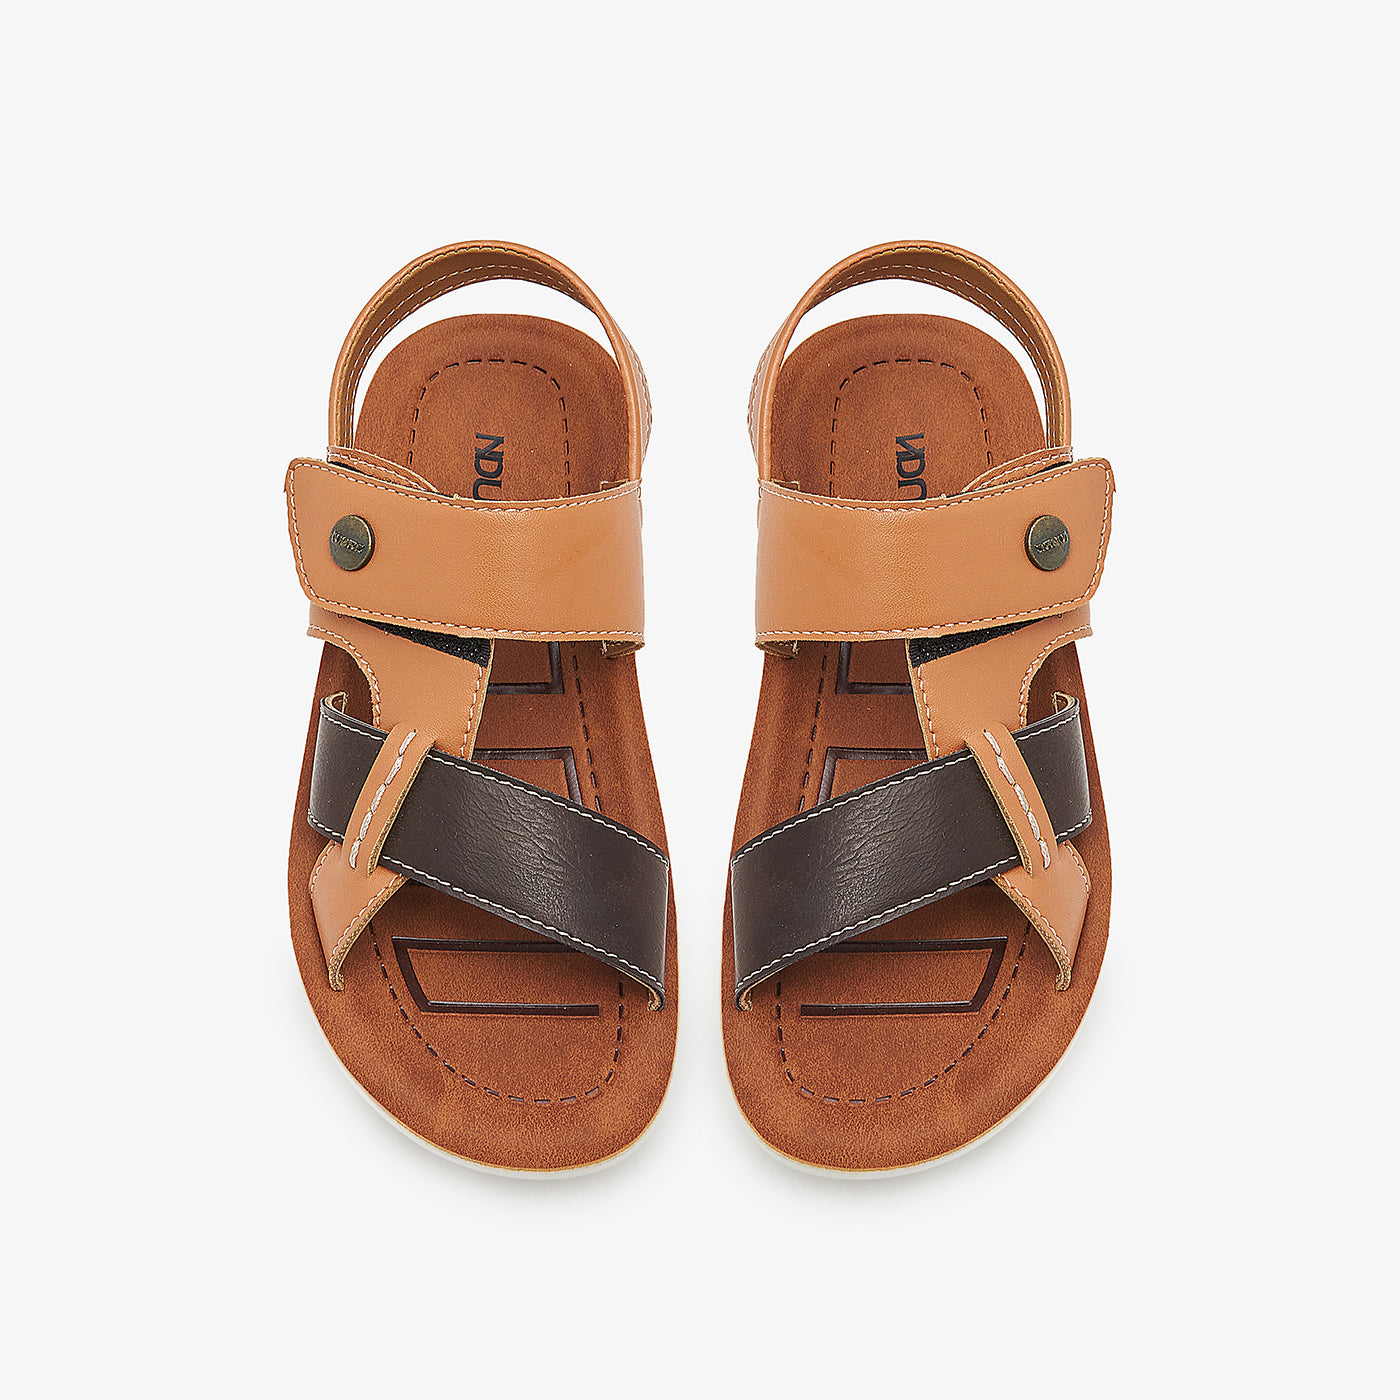 Casual sandals in Pakistan